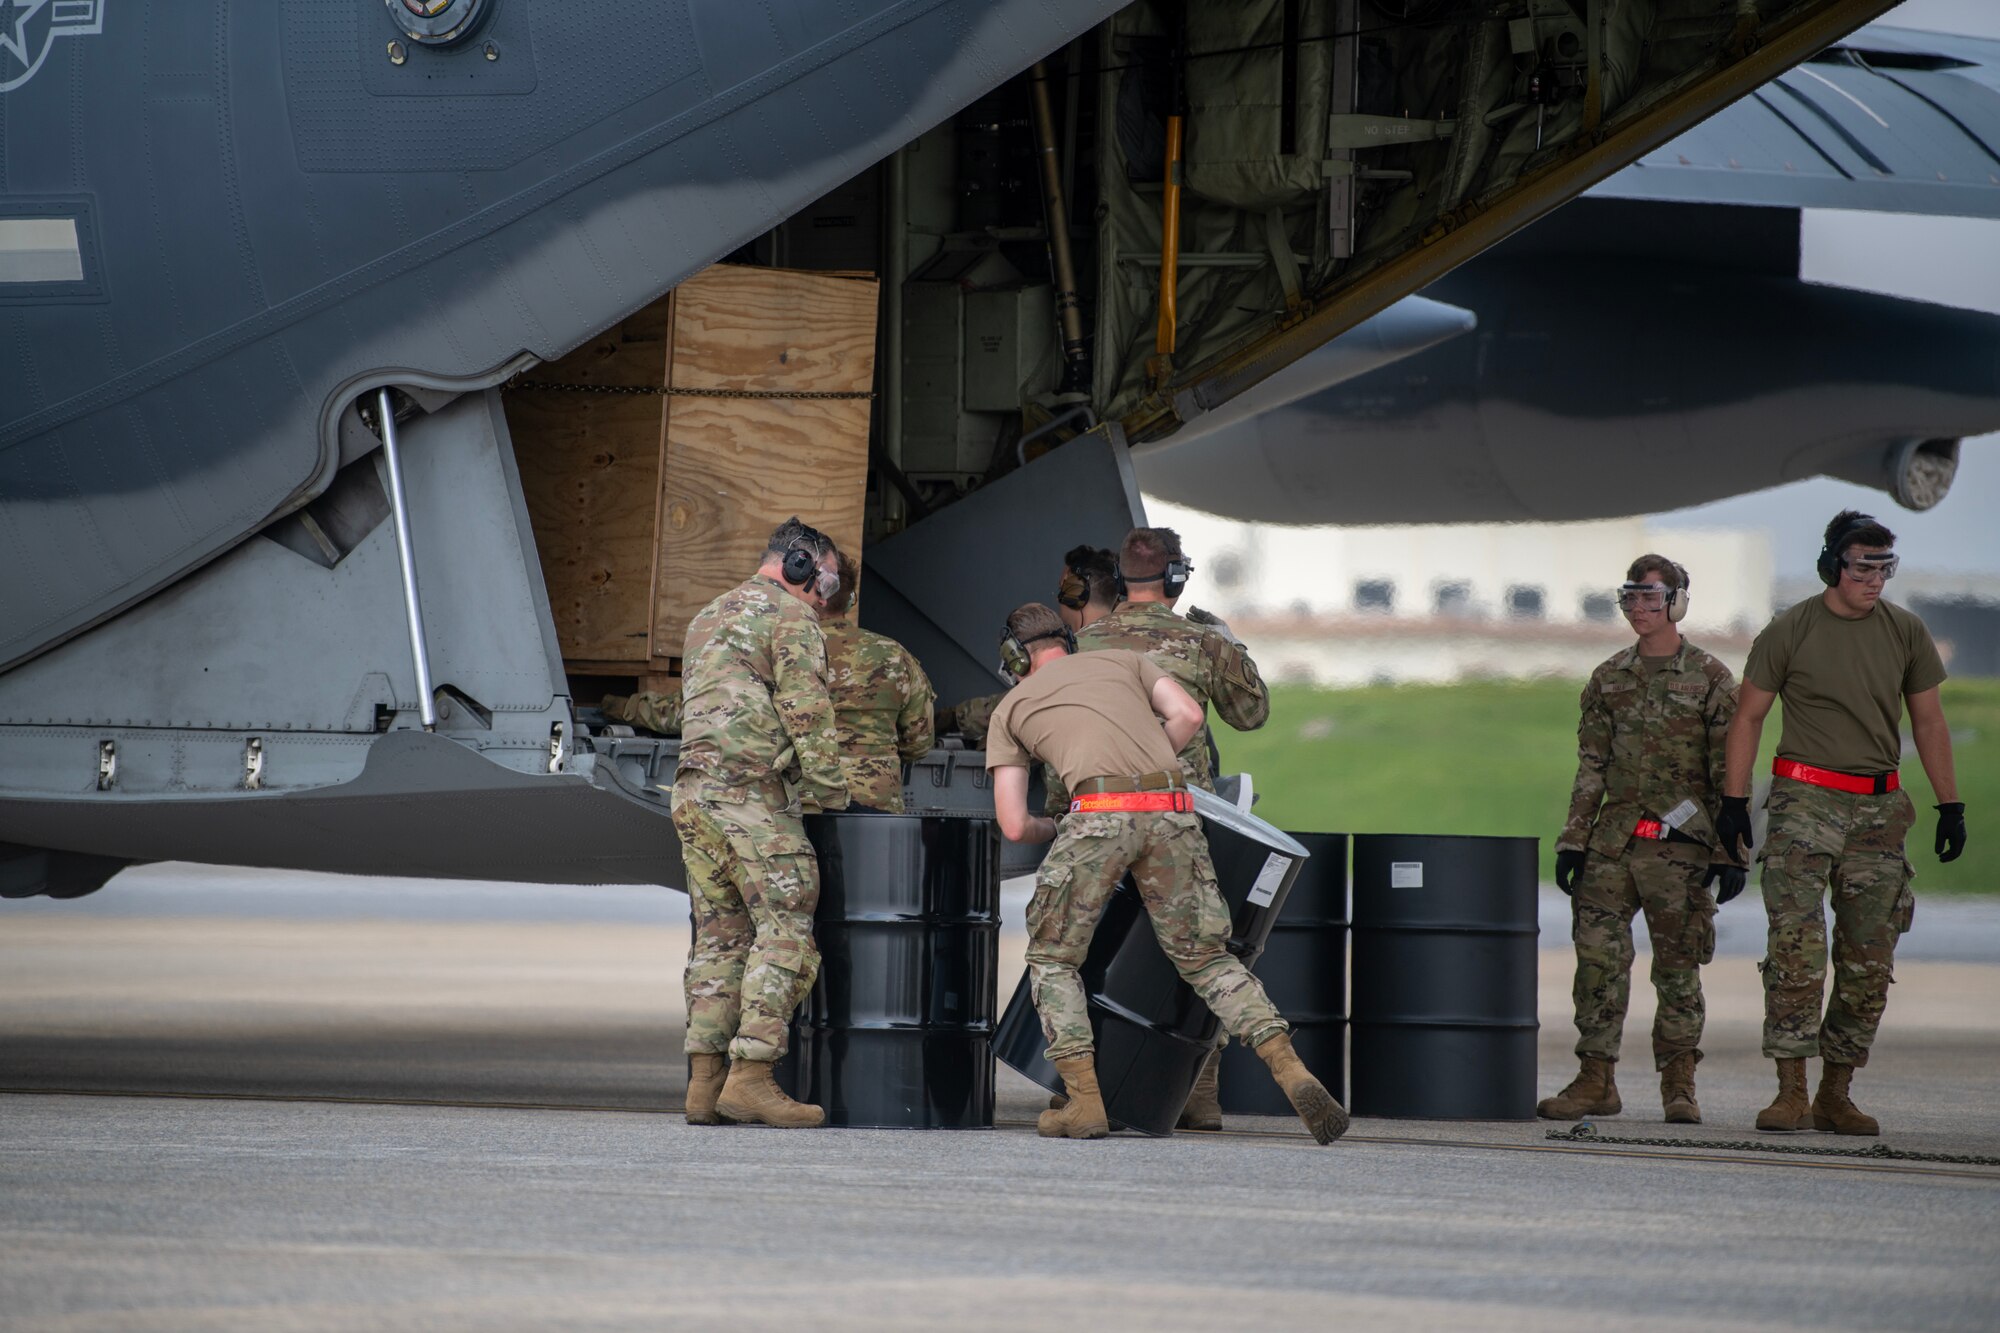 Airmen positioning barrels to distribute the weight of an unloading payload